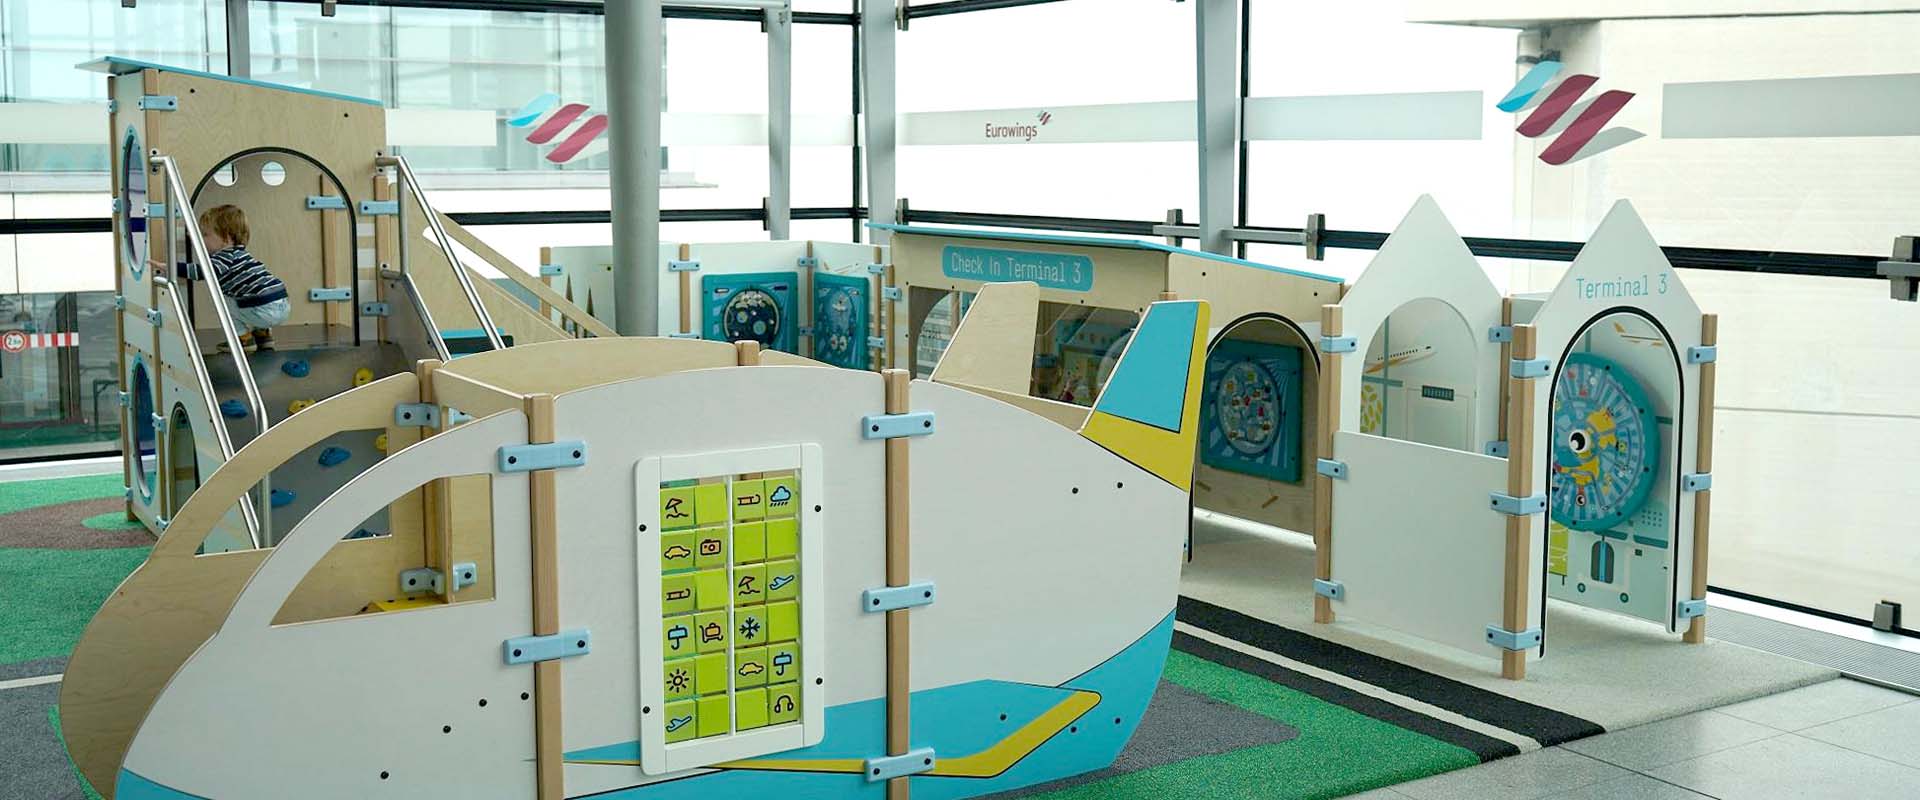  Airport Köln I Waiting for a flight is made easier with various IKC play concepts